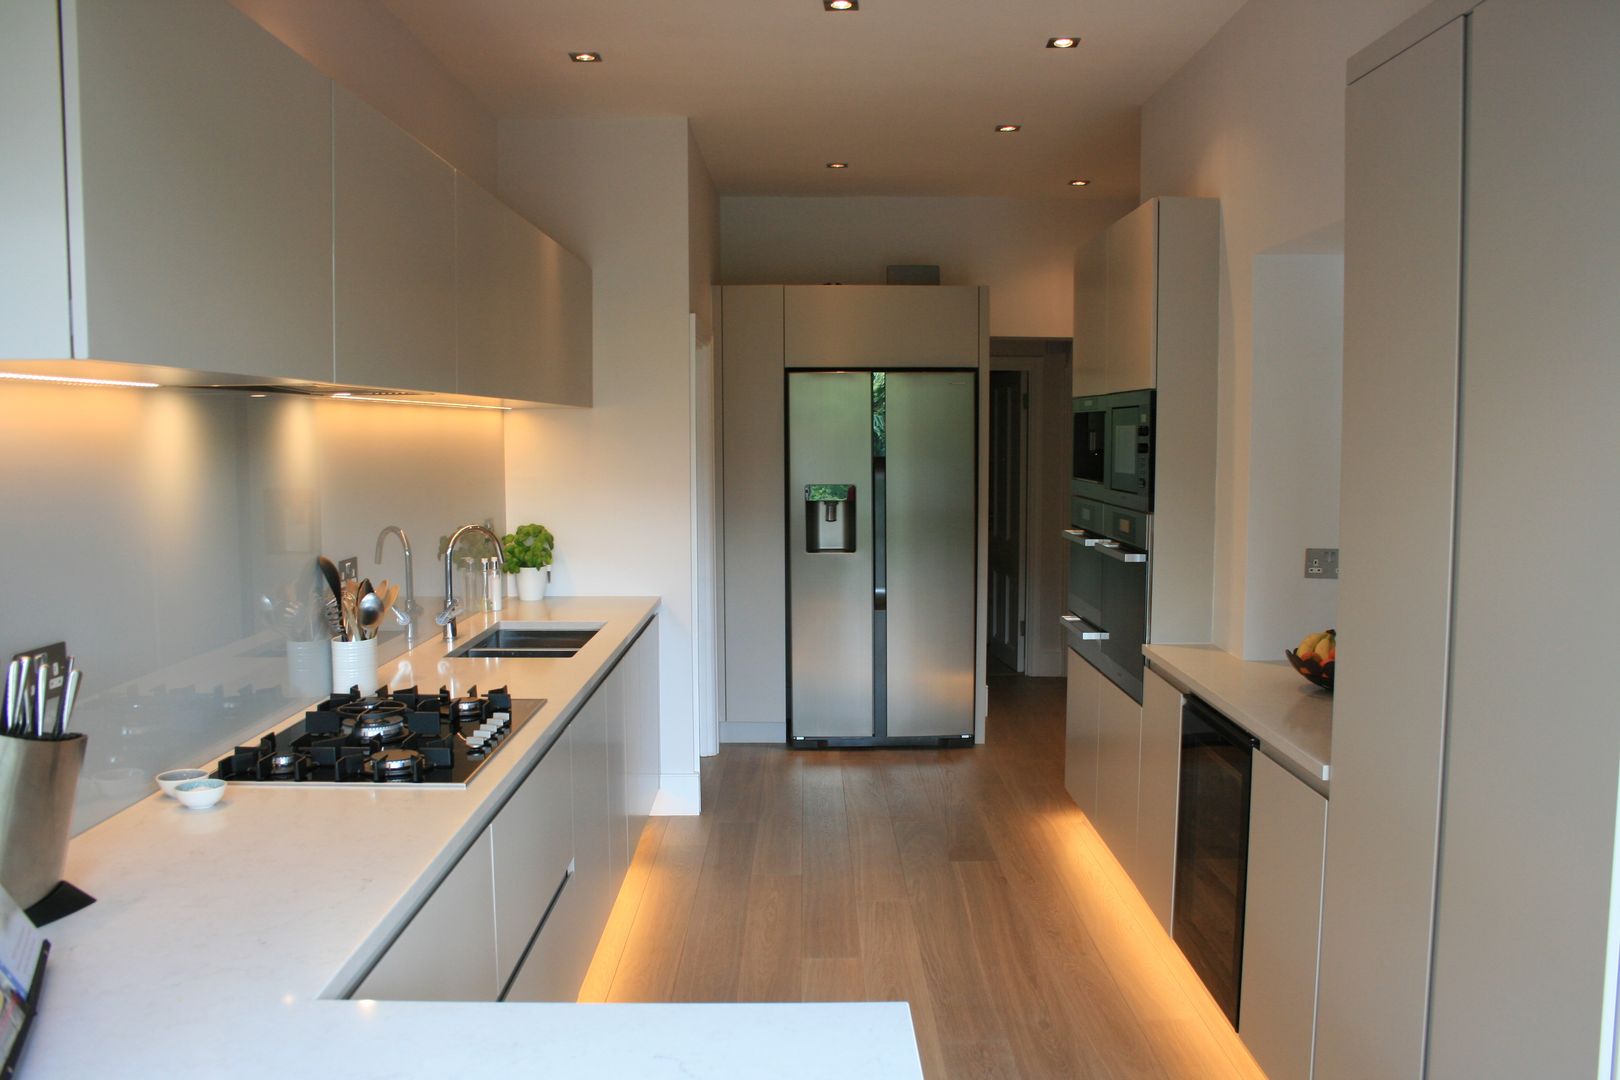 Barnes Kitchen , Place Design Kitchens and Interiors Place Design Kitchens and Interiors Cucina minimalista